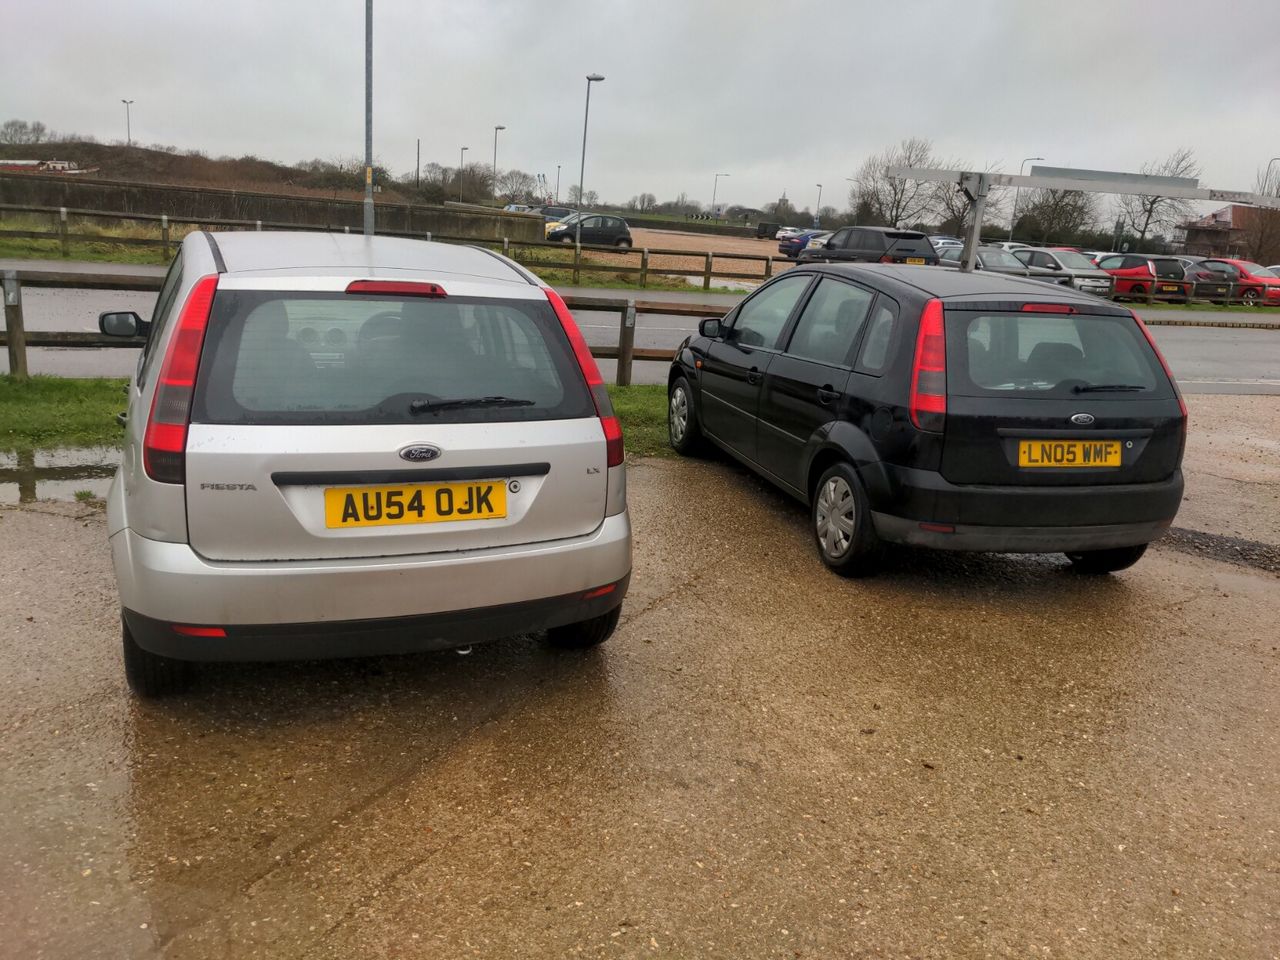 Two fifth-generation Ford Fiestas parked next to each other in a car park; mine is silver, the other is black, neither is very clean and it is a drab overcast day.